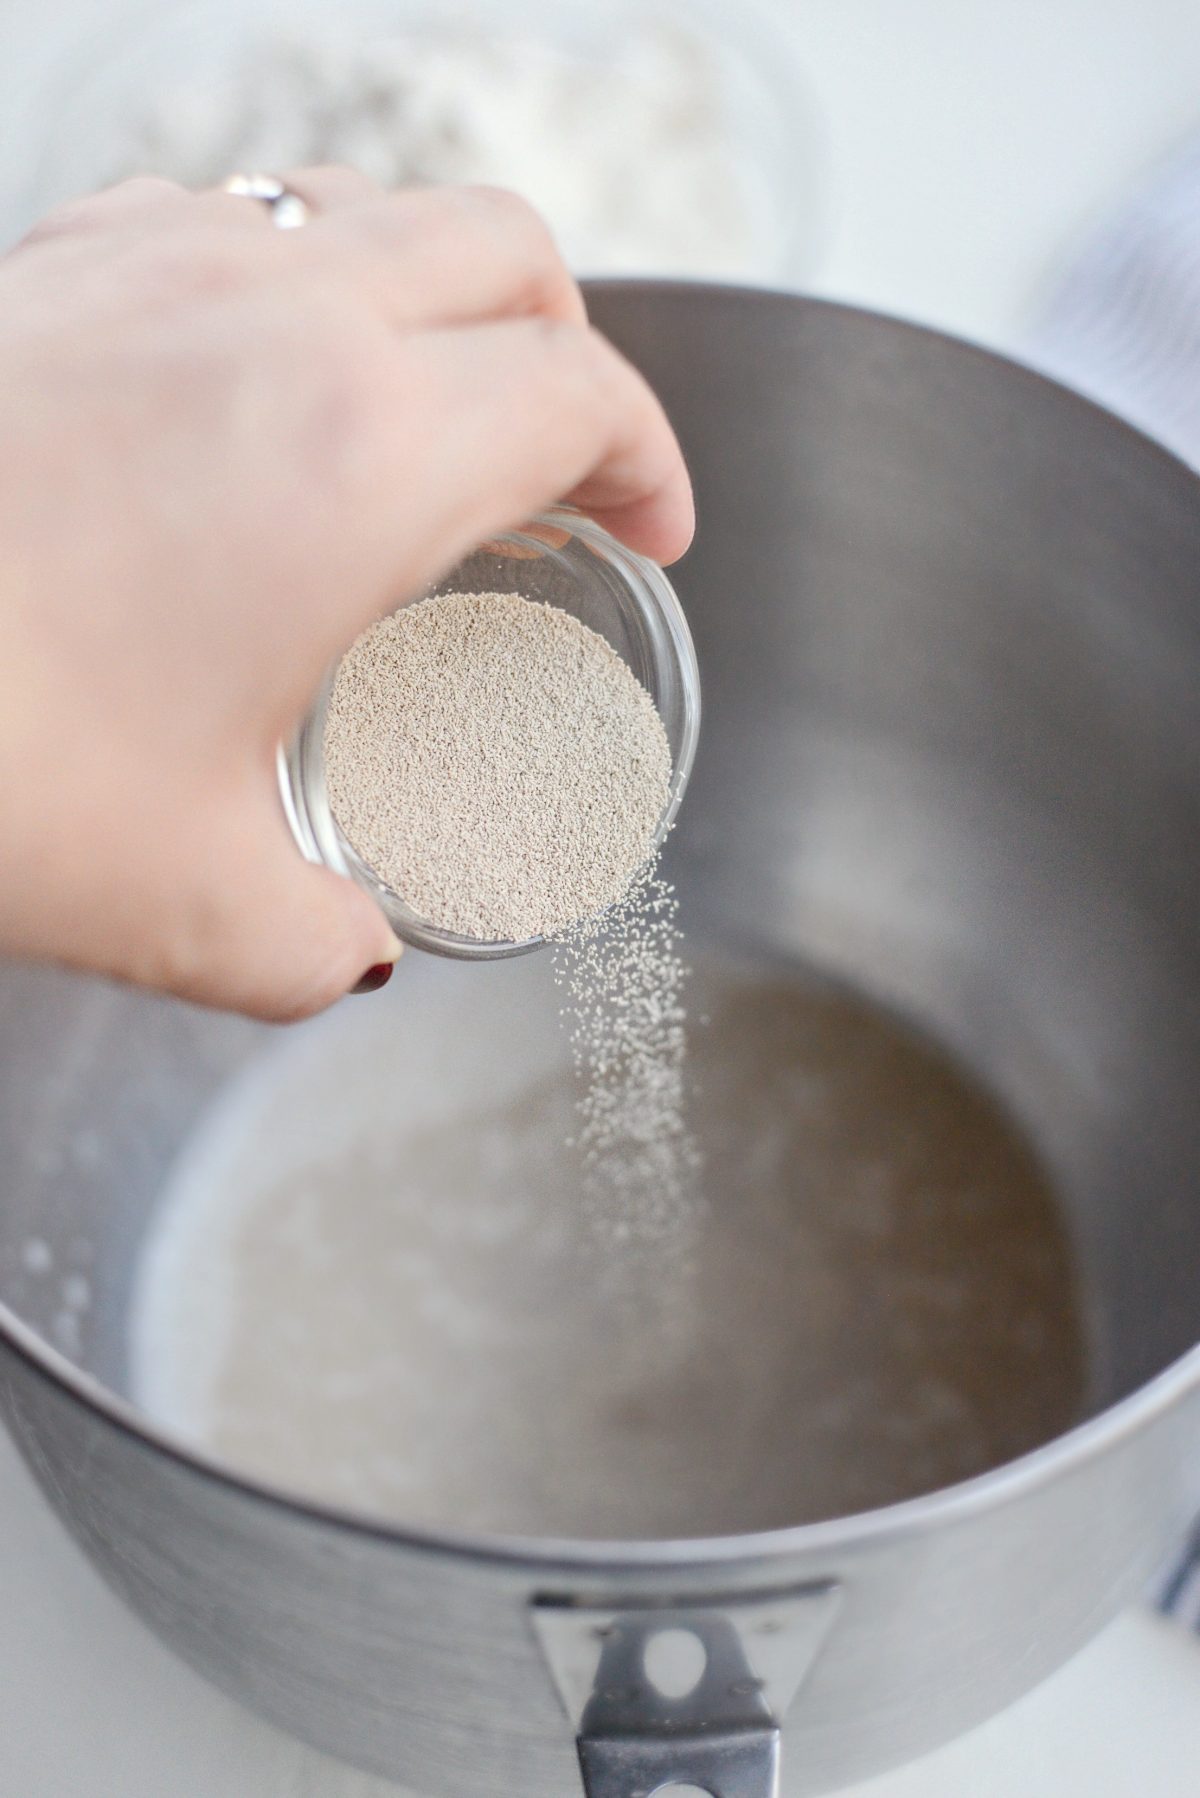 sprinkle in the yeast.